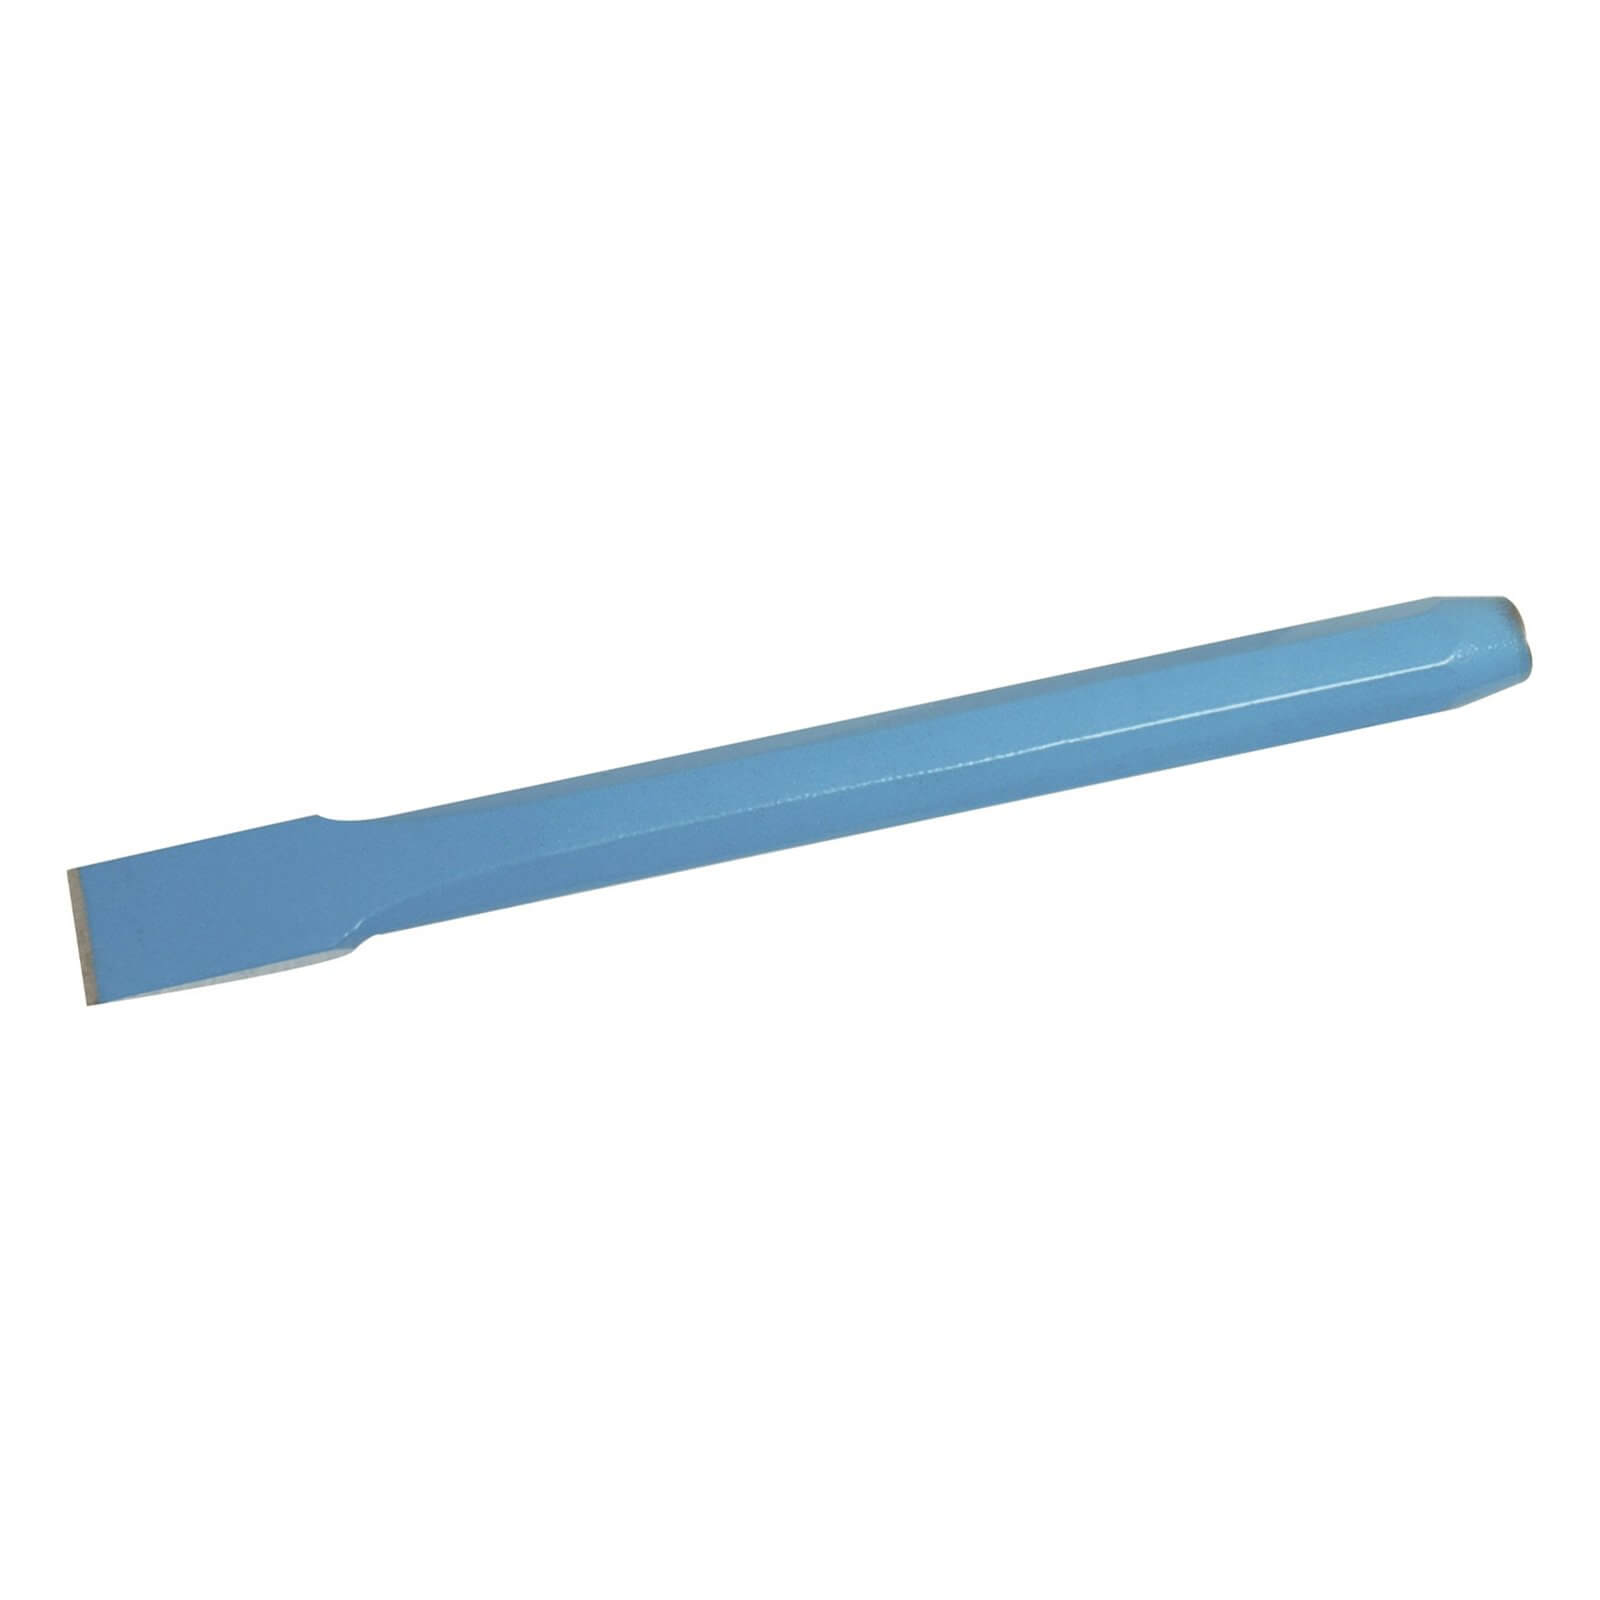 Photo of Silverline Cold Chisel - 12x200mm